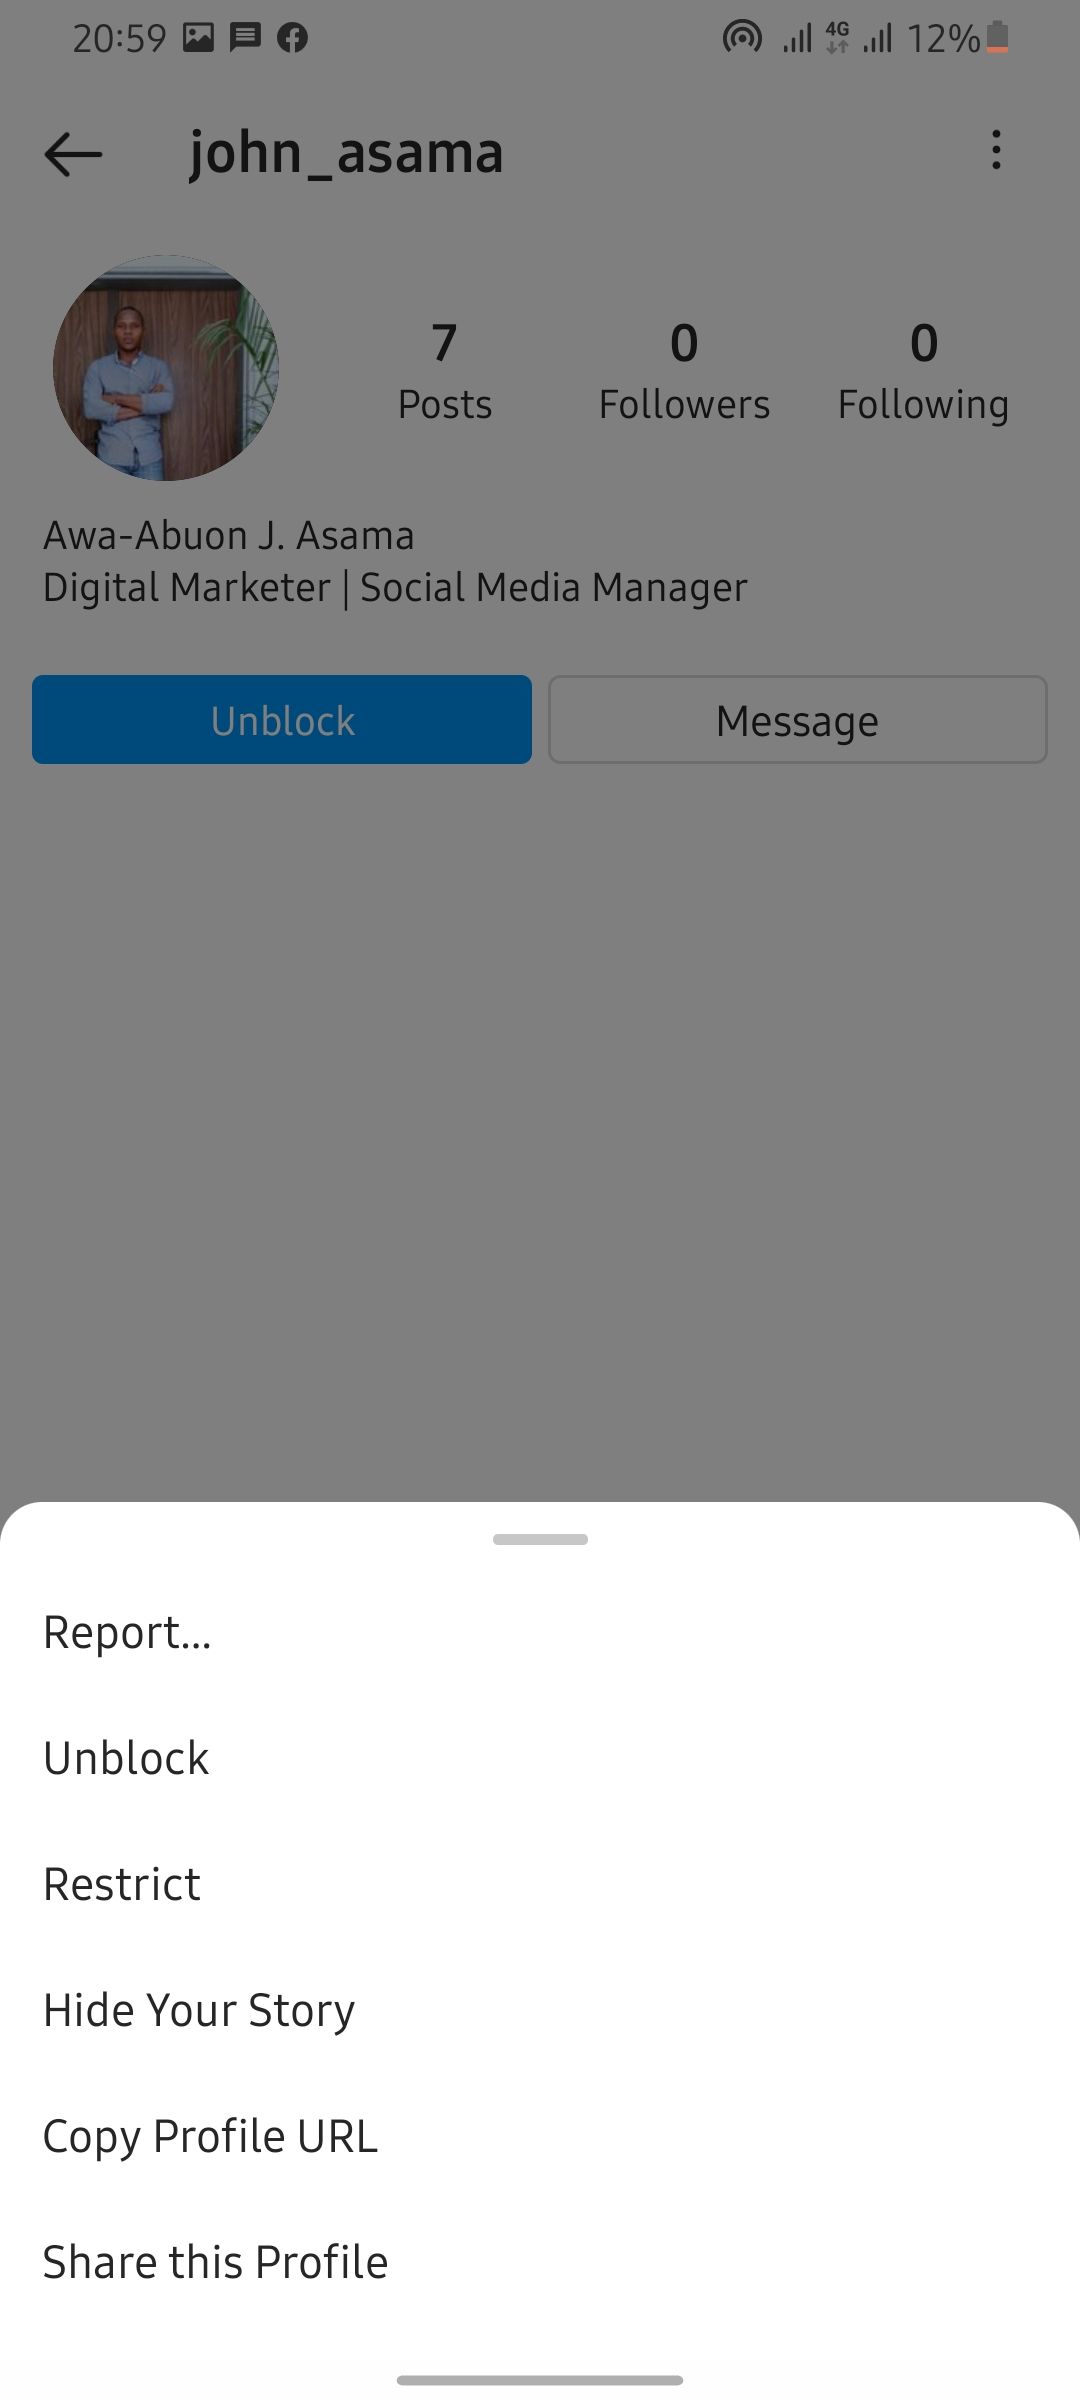 List of confirmation to unblock someone on Instagram